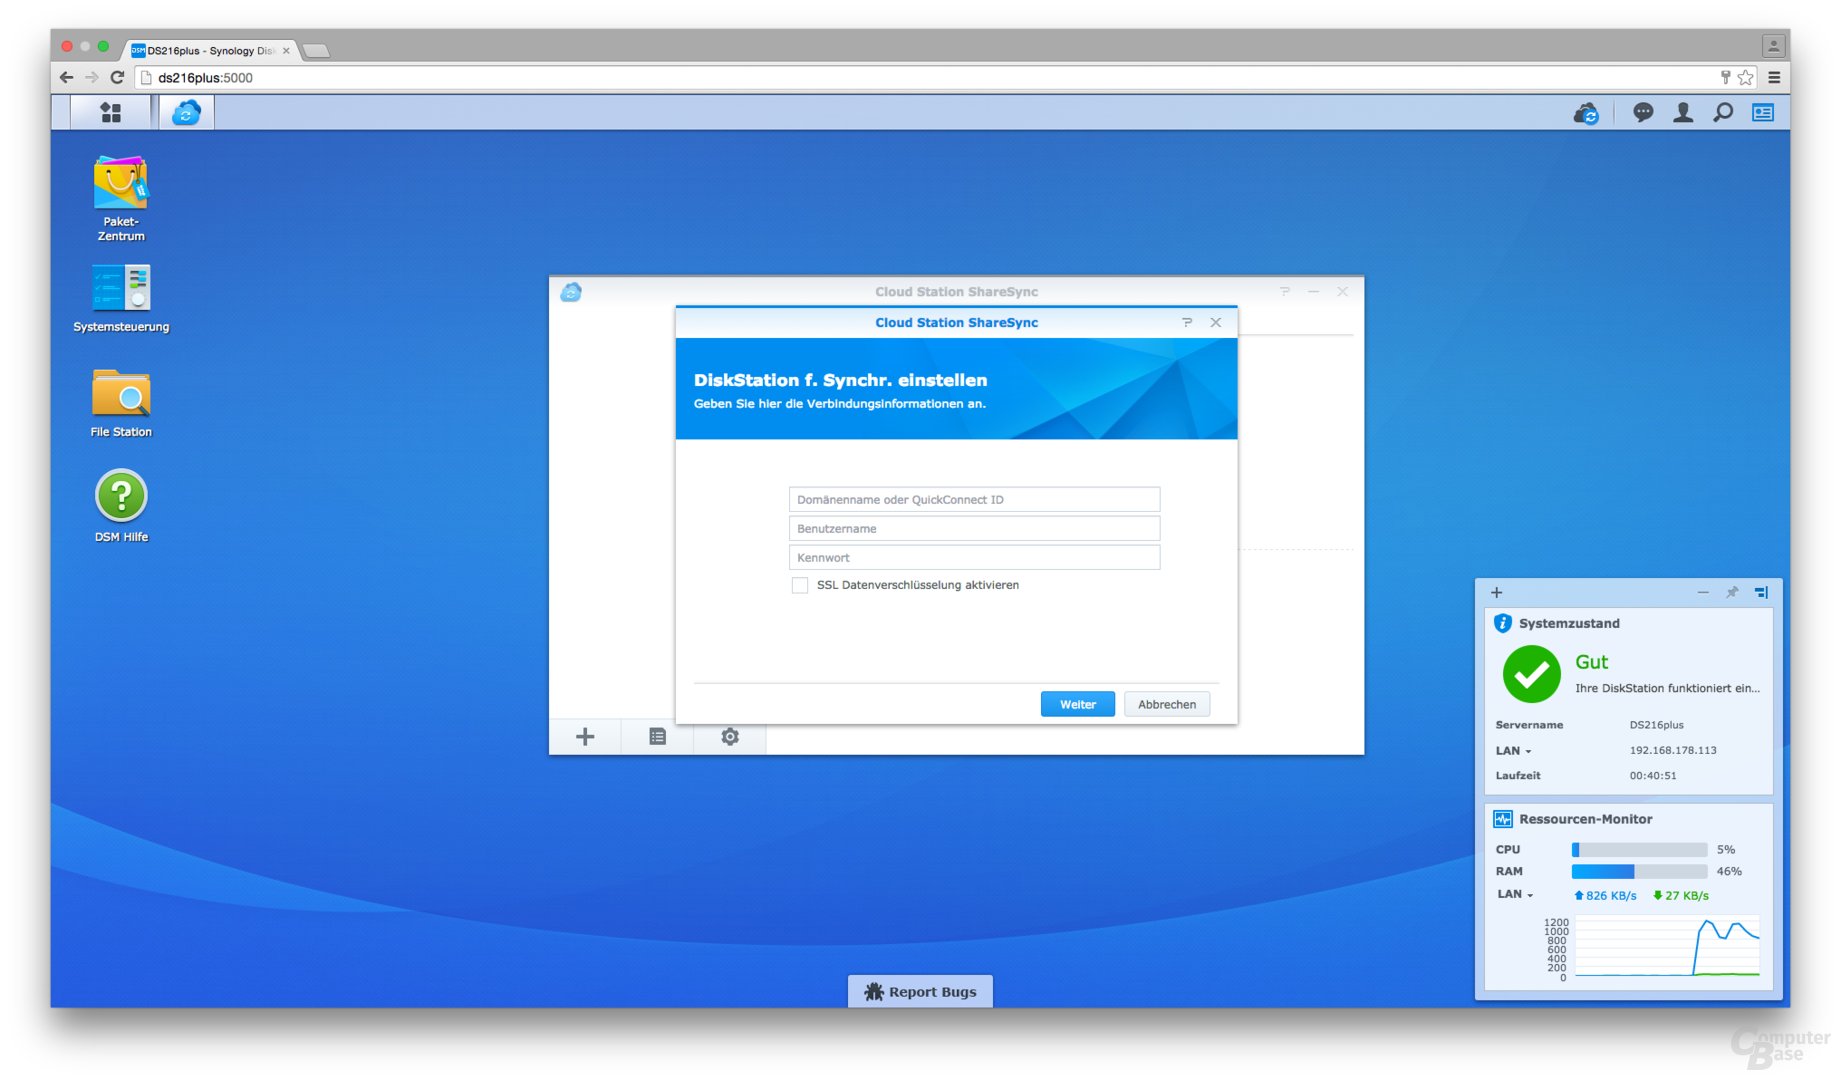 synology drive sharesync service system requirements